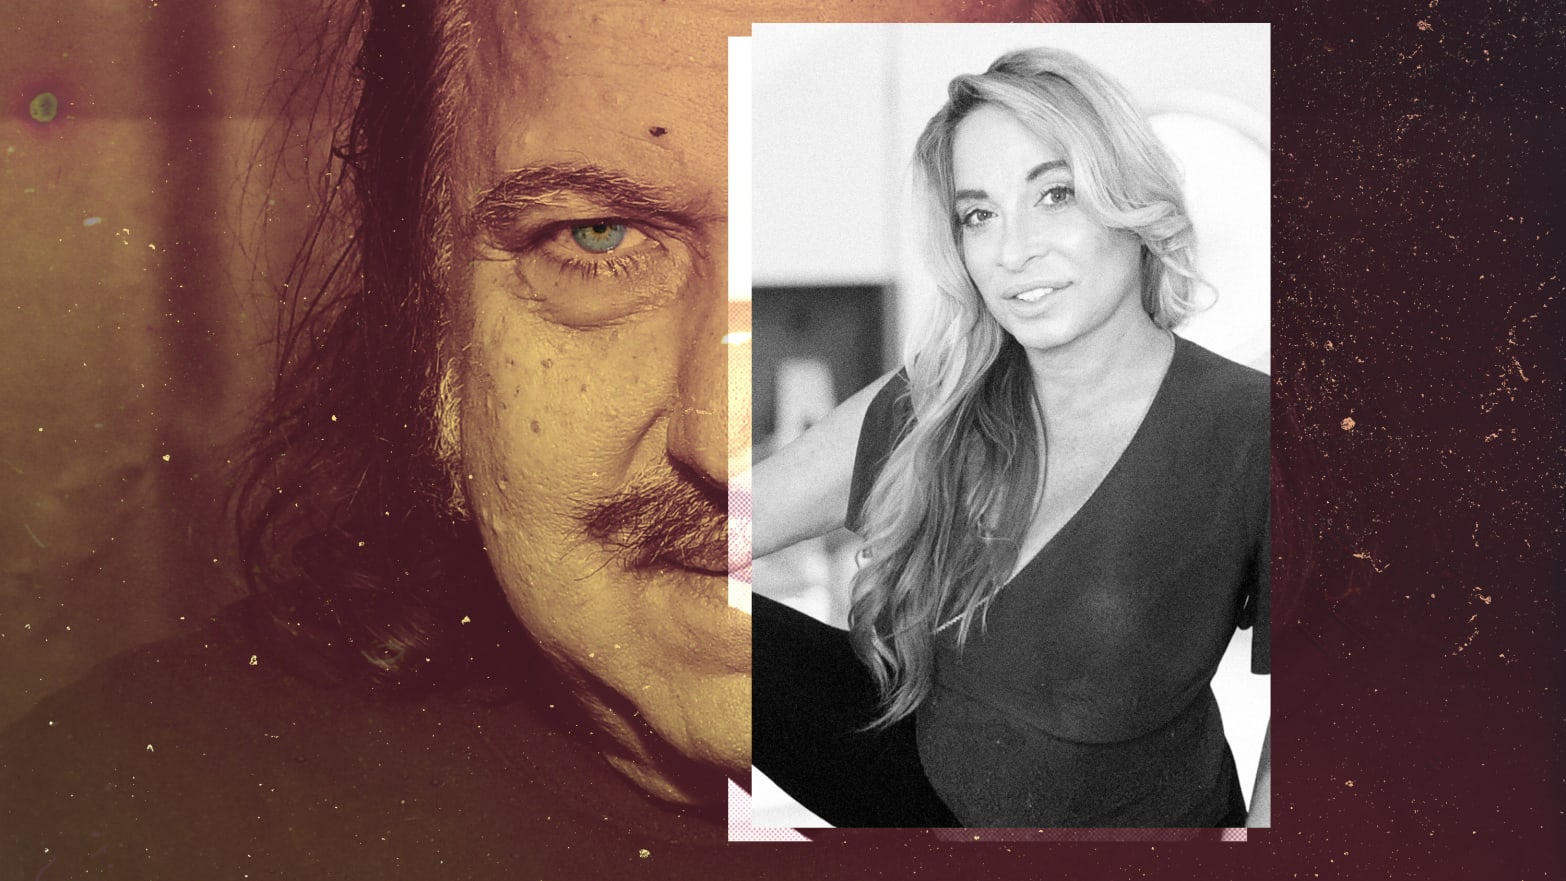 Real Sex Repe Fucking - Ron Jeremy Rape Accuser Jennifer Steele Mondello Comes Forward, Says 'I  Wondered if He Planned to Kill Me'